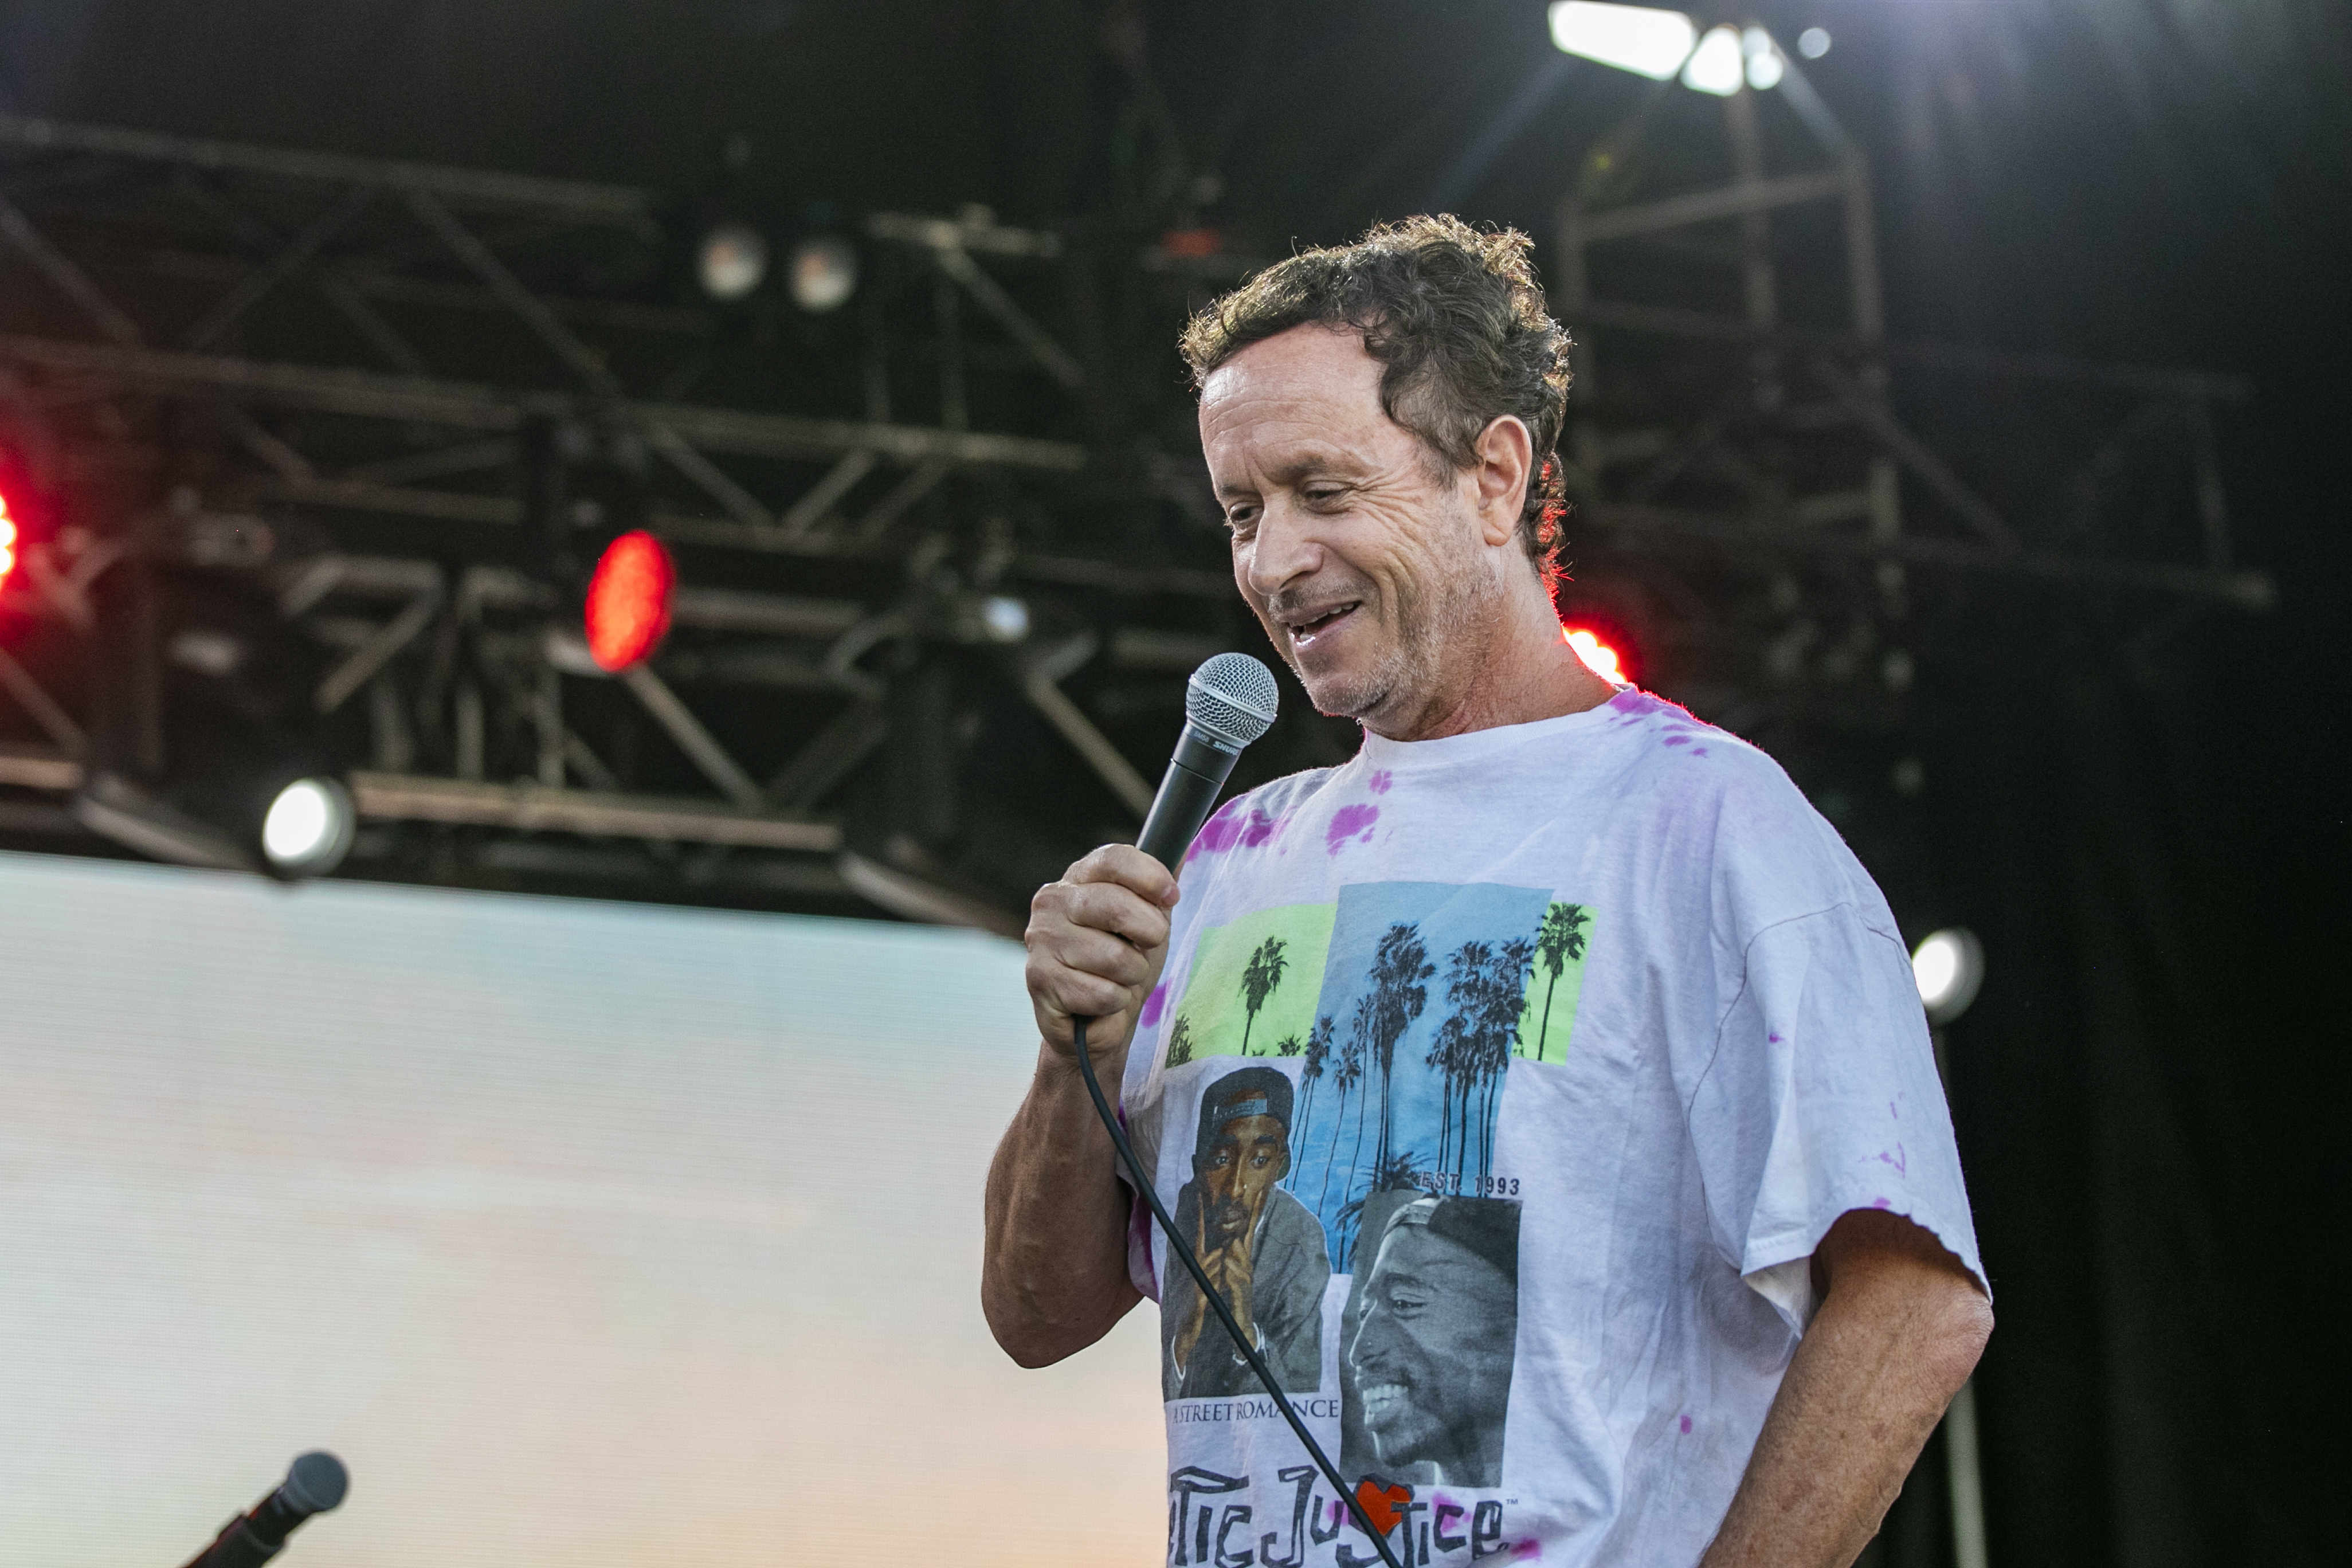 Pauly Shore performs at the Great Outdoor Comedy Festival on August 12, 2022, in Alberta, Canada. | Source: Getty Images